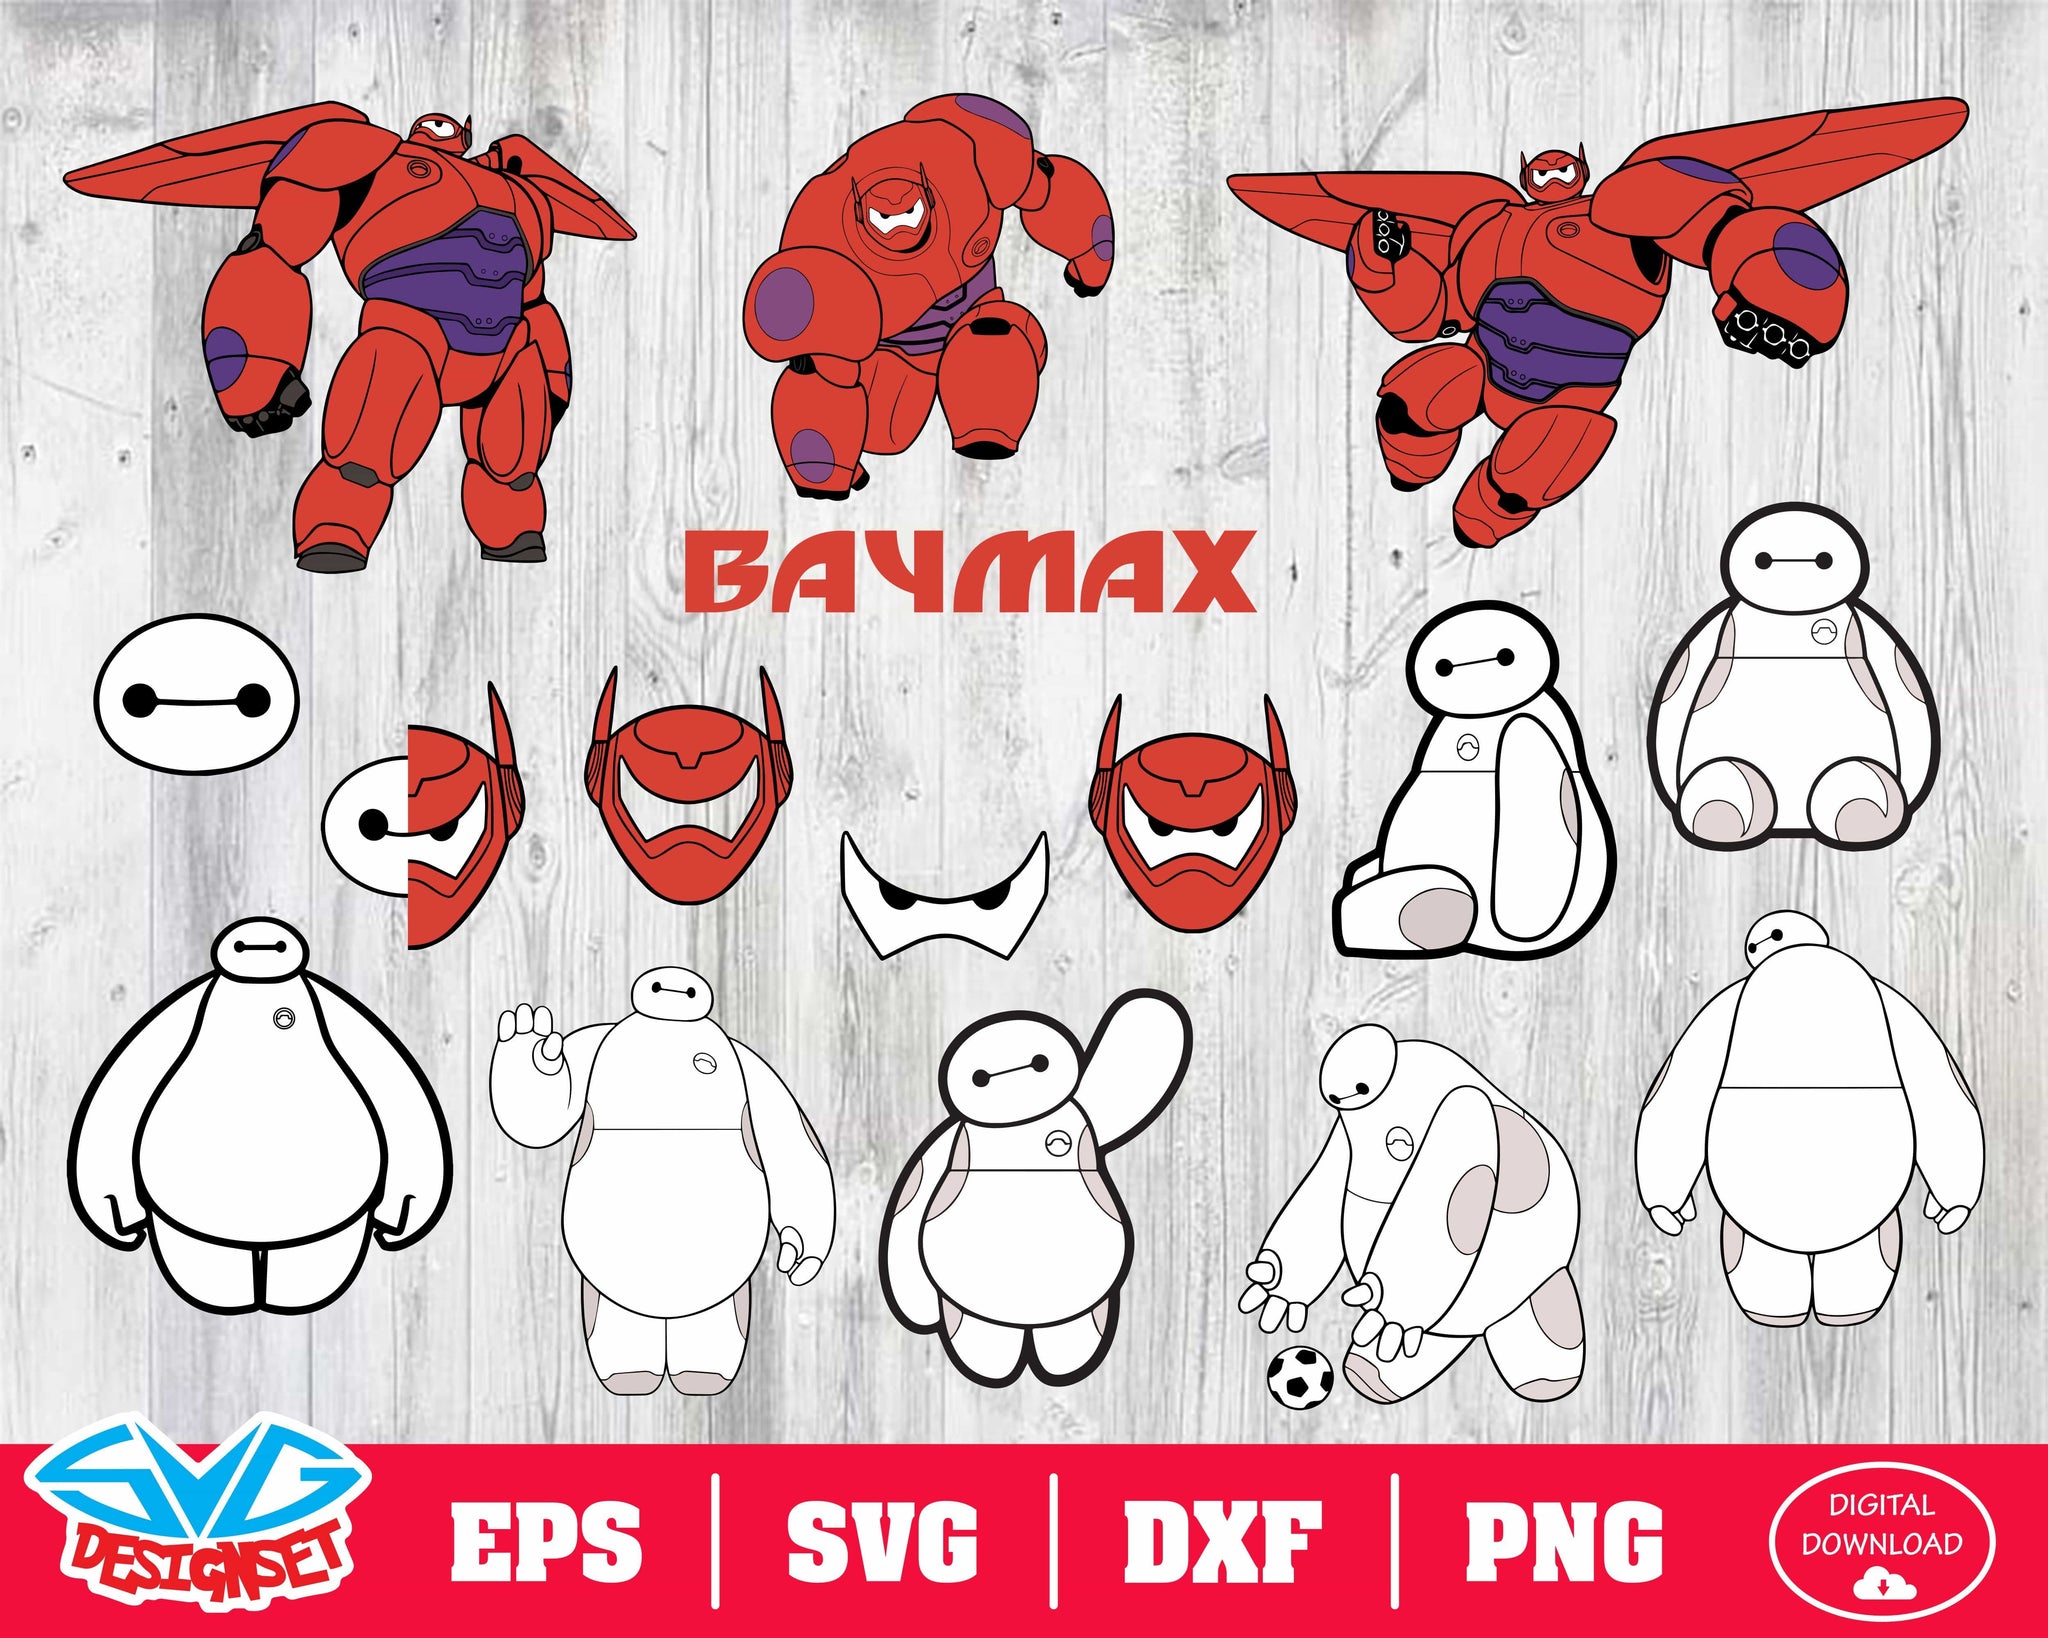 Baymax Svg, Dxf, Eps, Png, Clipart, Silhouette and Cutfiles #1 - SVGDesignSets